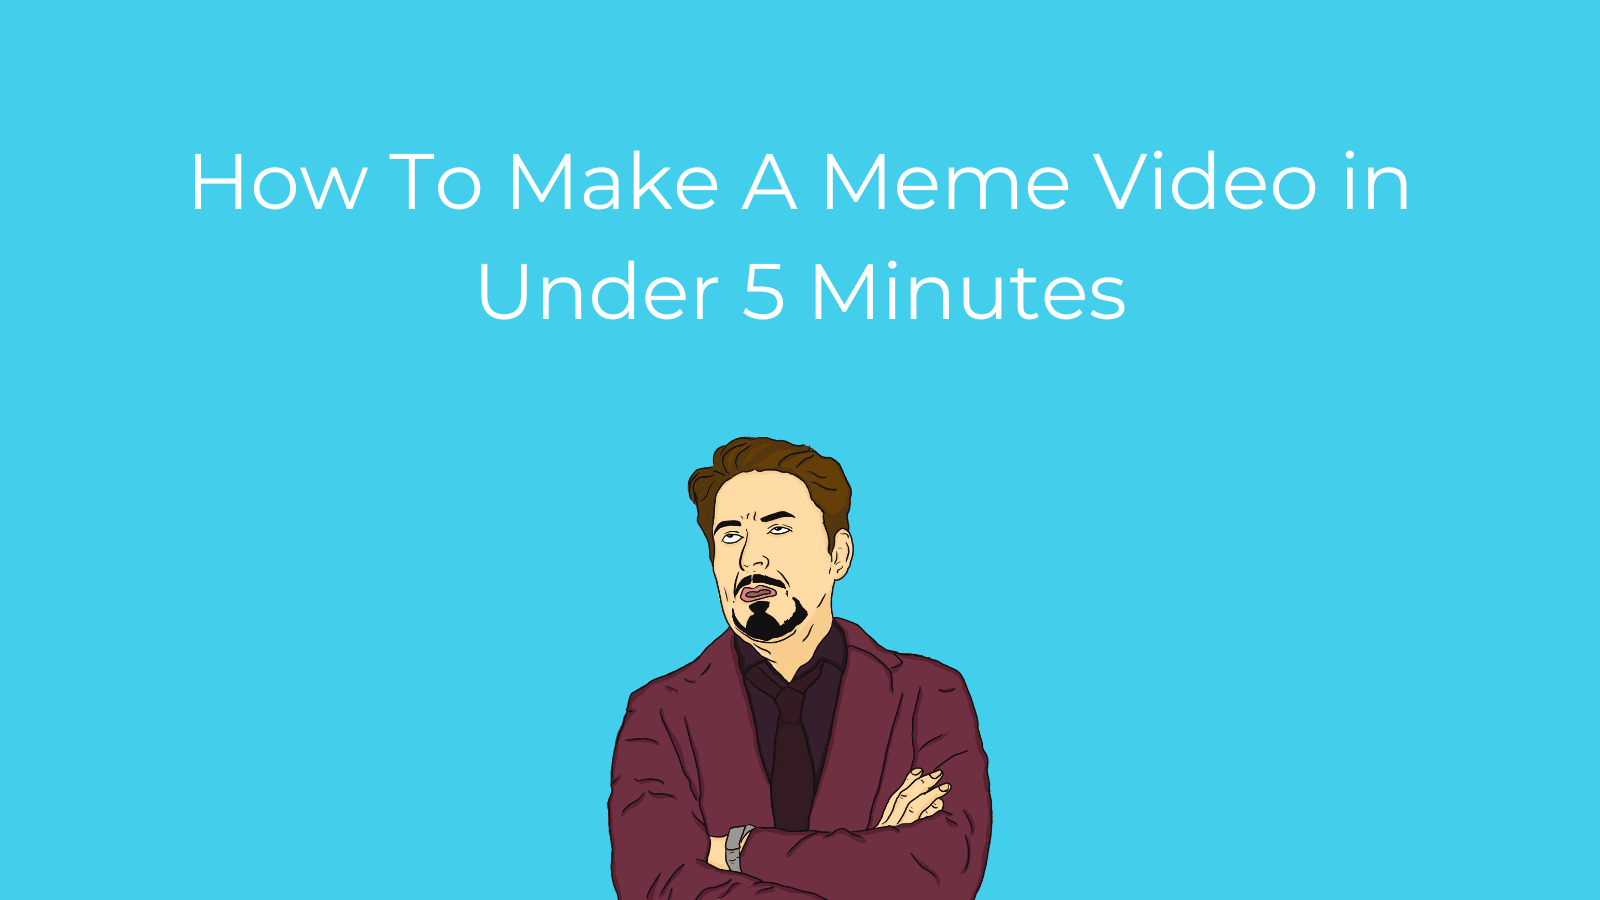 How To Make A Meme Video in Under 5 Minutes